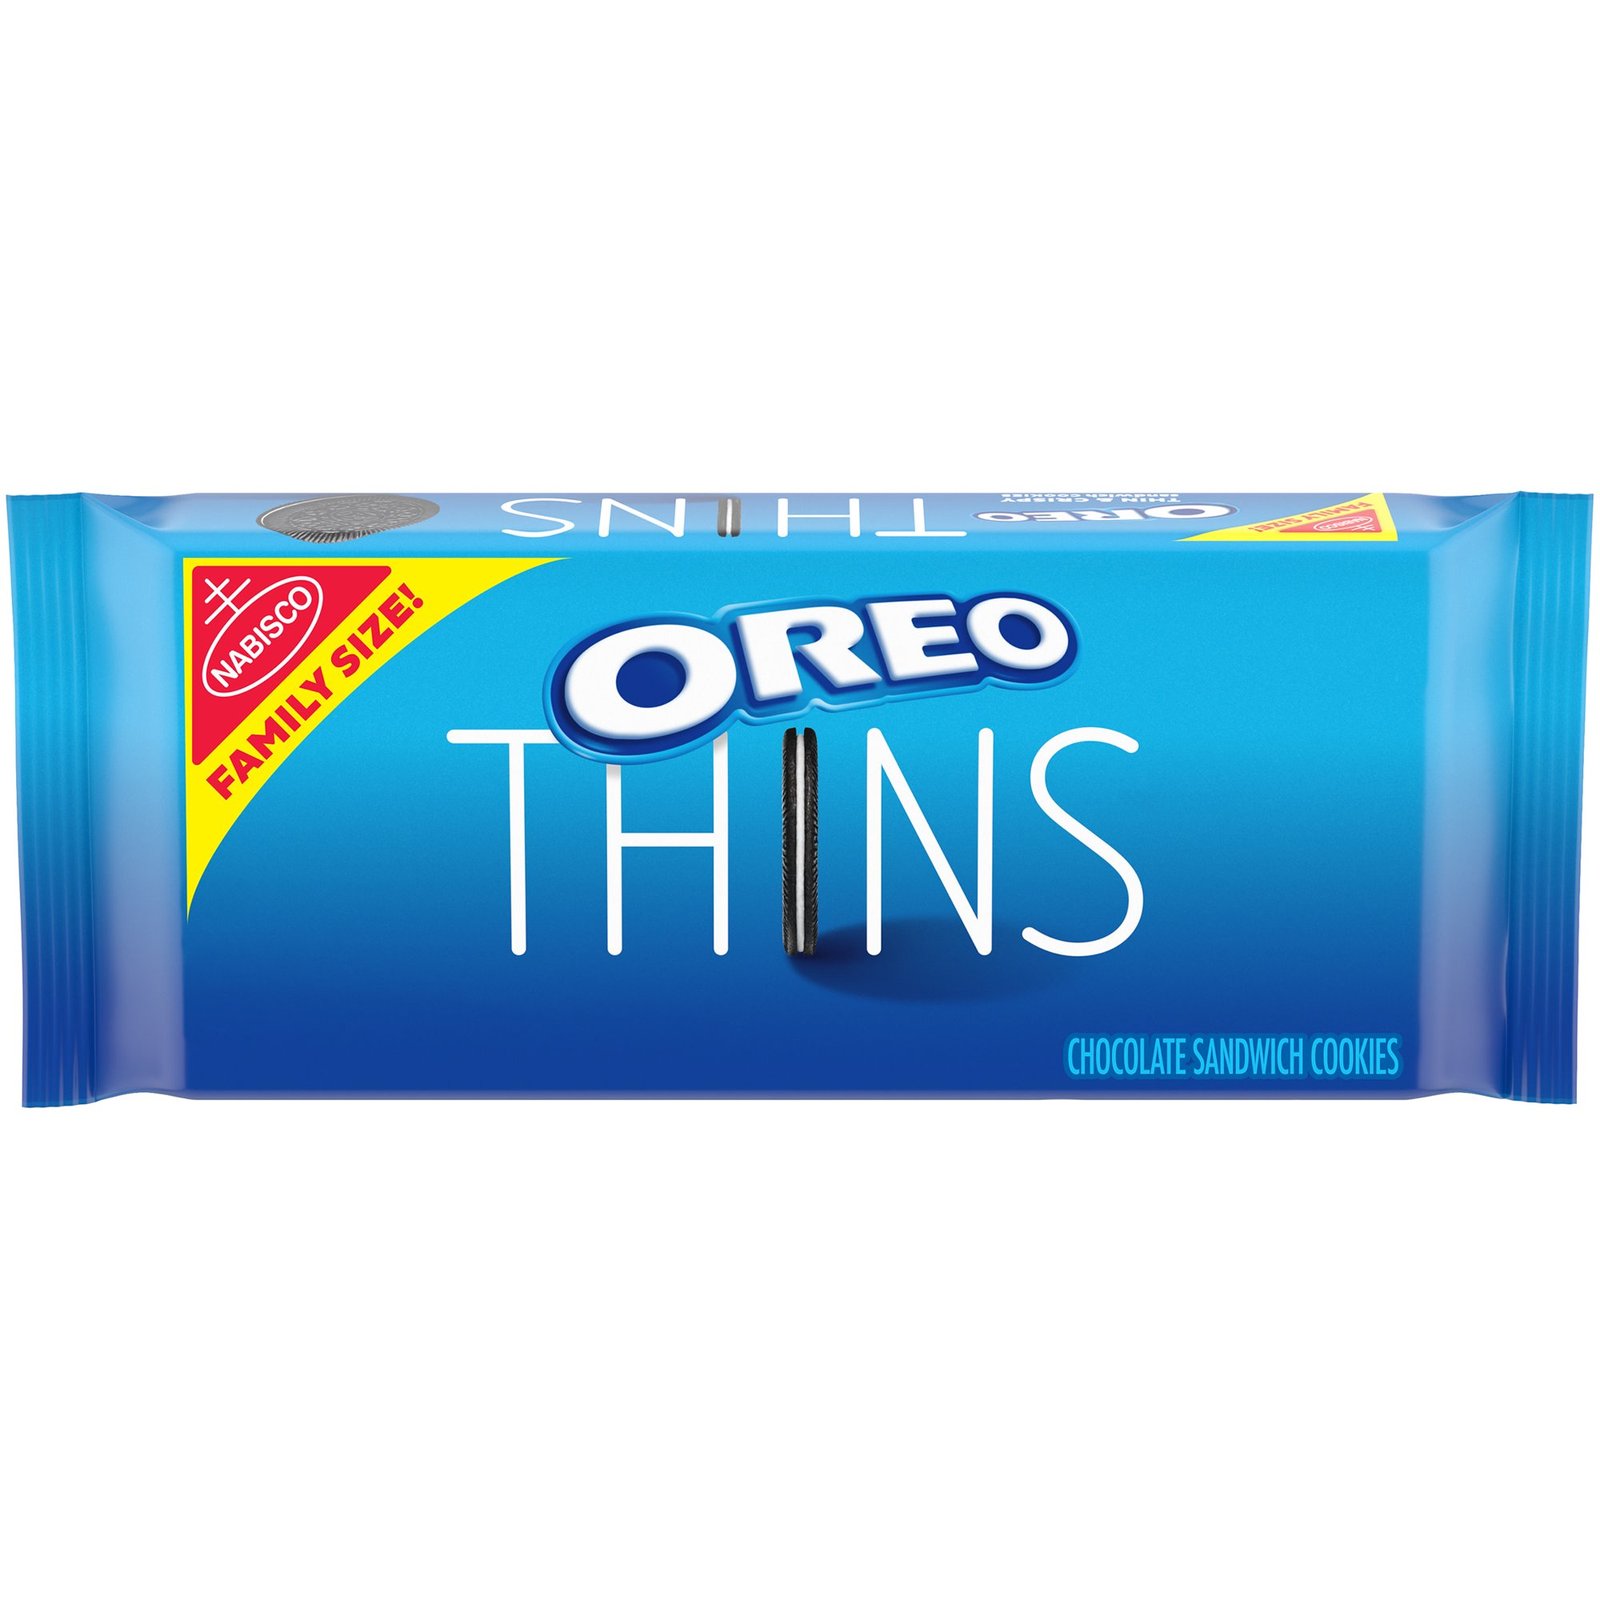 OREO Thins Chocolate Sandwich Cookies Original Flavor Family Size Pack - 13.1 oz